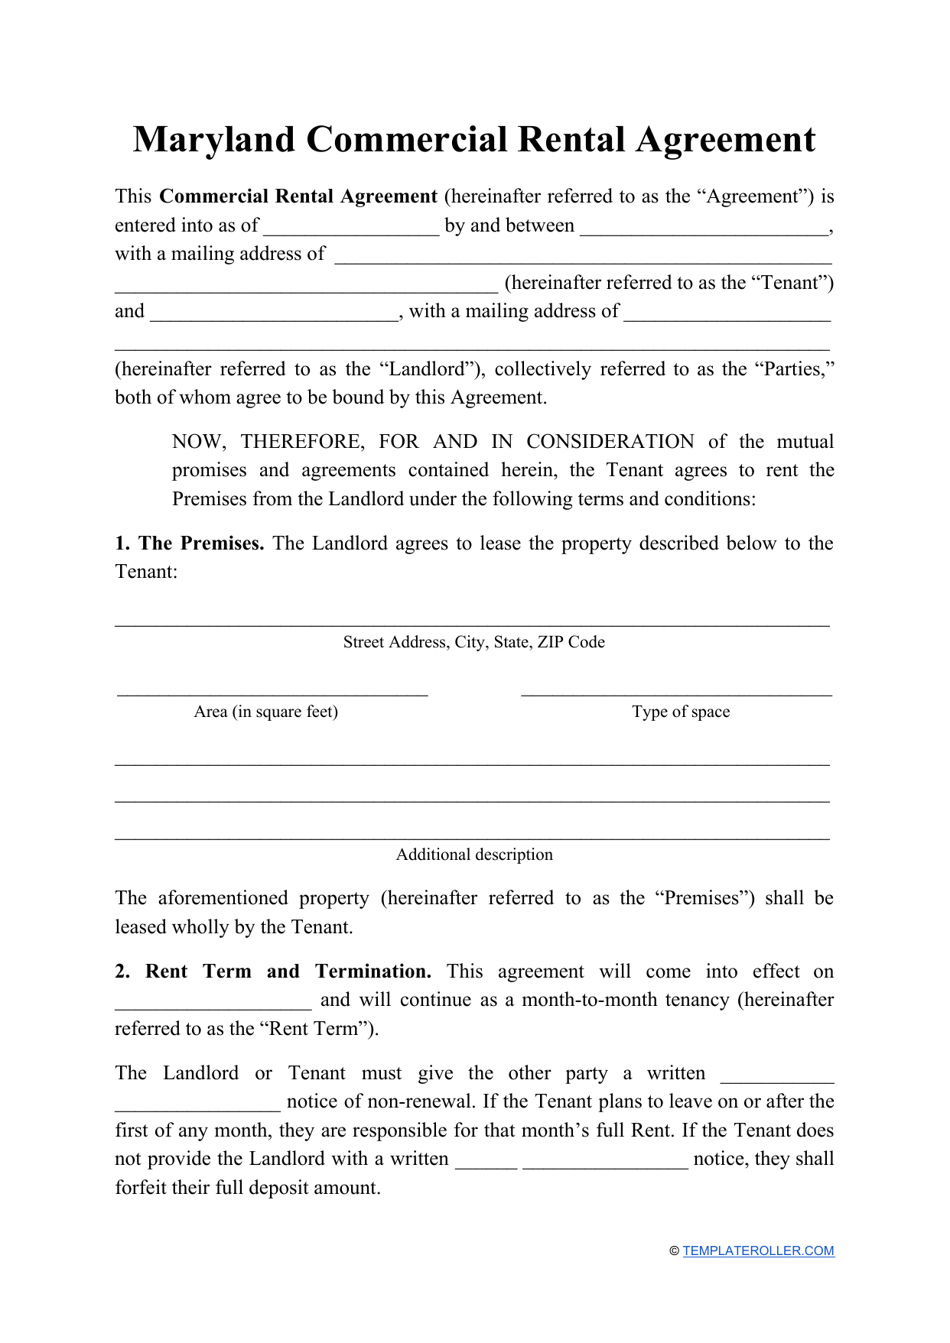 Commercial Rental Agreement Template - Maryland, Page 1